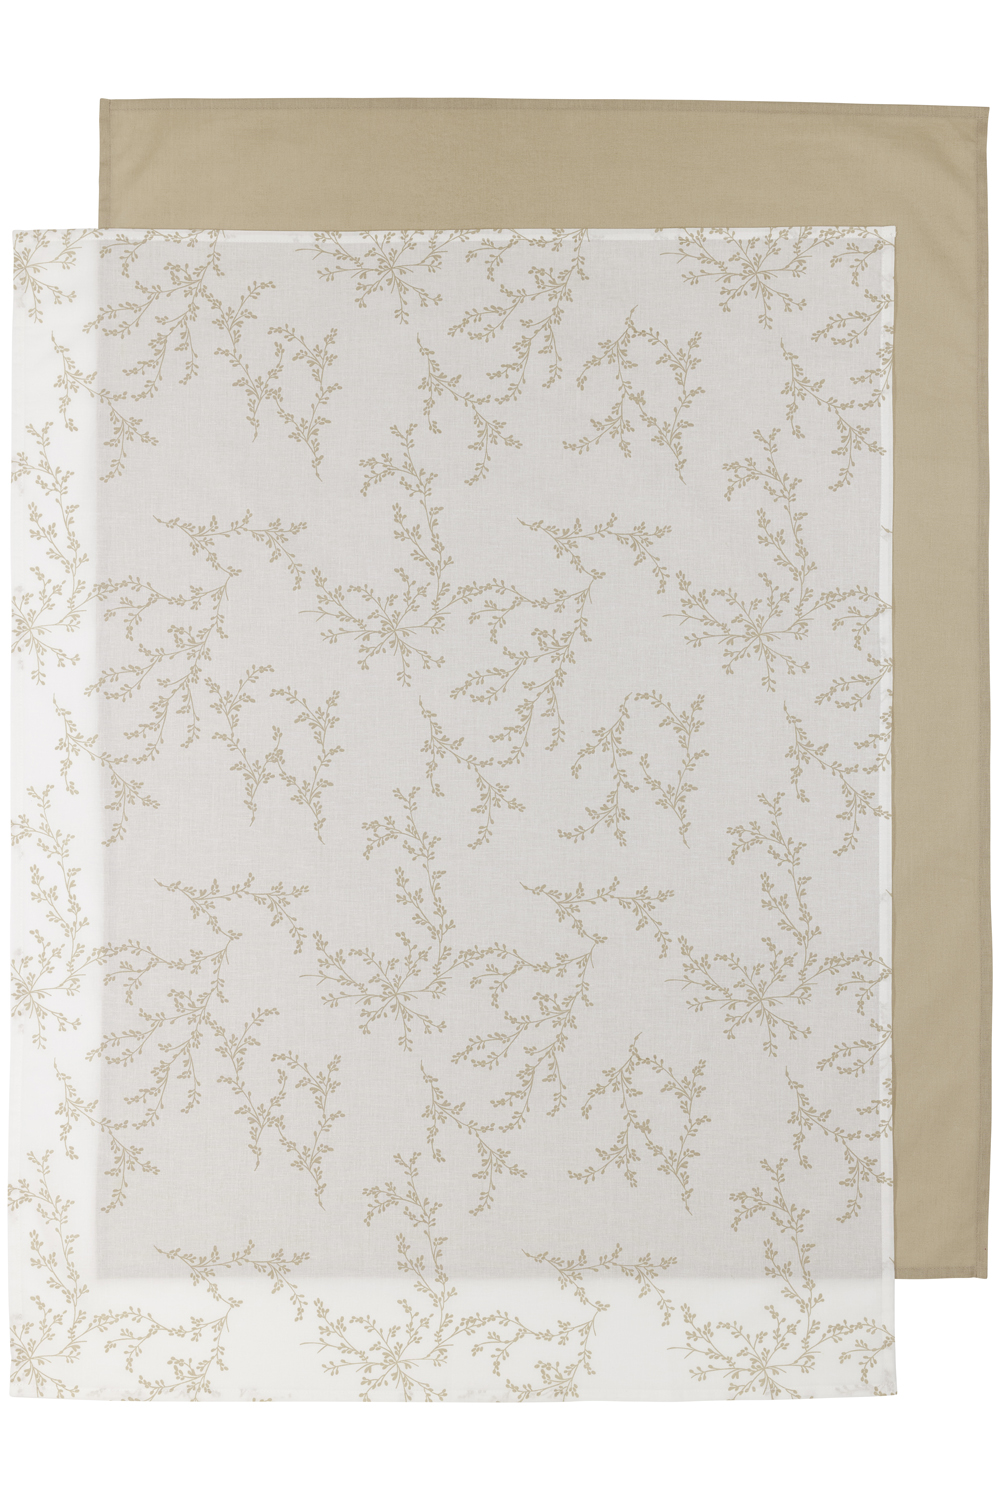 Wieglaken 2-pack Branches - Sand/Offwhite - 75x100cm